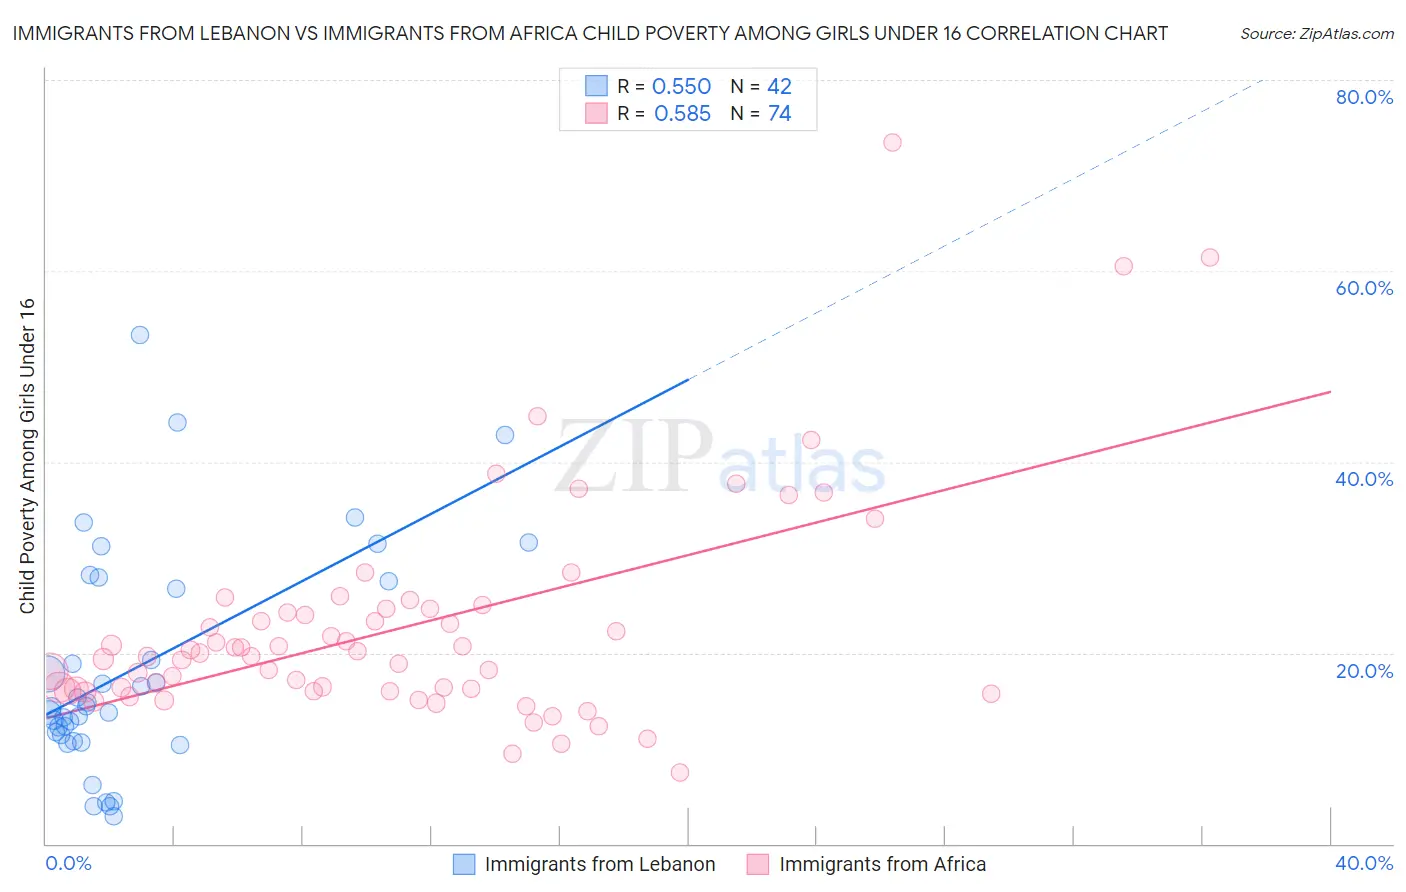 Immigrants from Lebanon vs Immigrants from Africa Child Poverty Among Girls Under 16